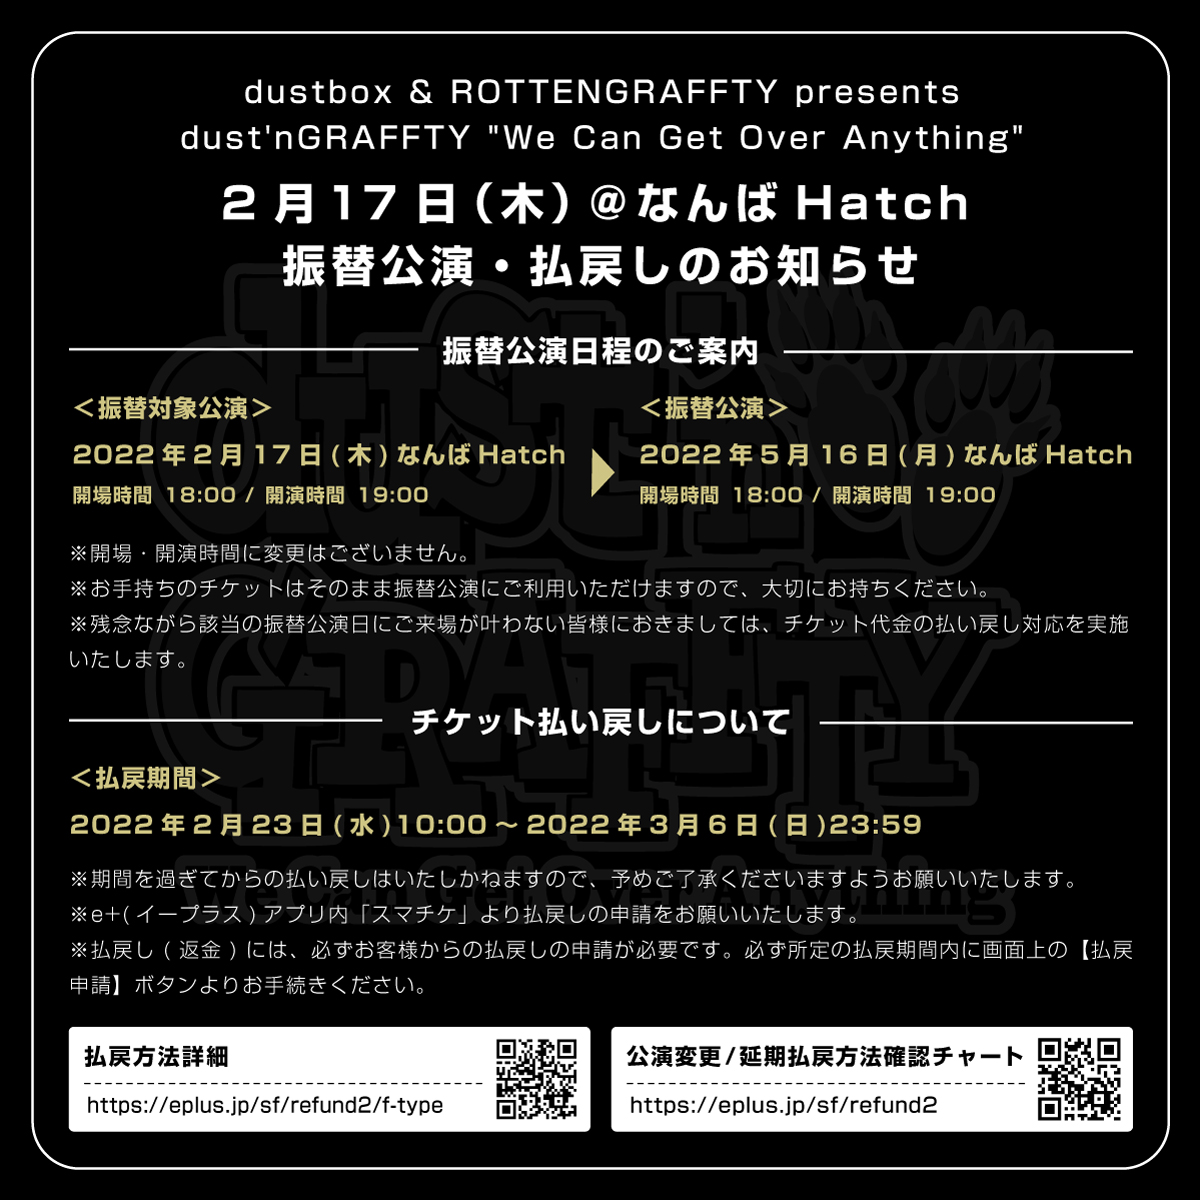 dustbox & ROTTENGRAFFTY presents dust'nGRAFFTY “We Can Get Over 